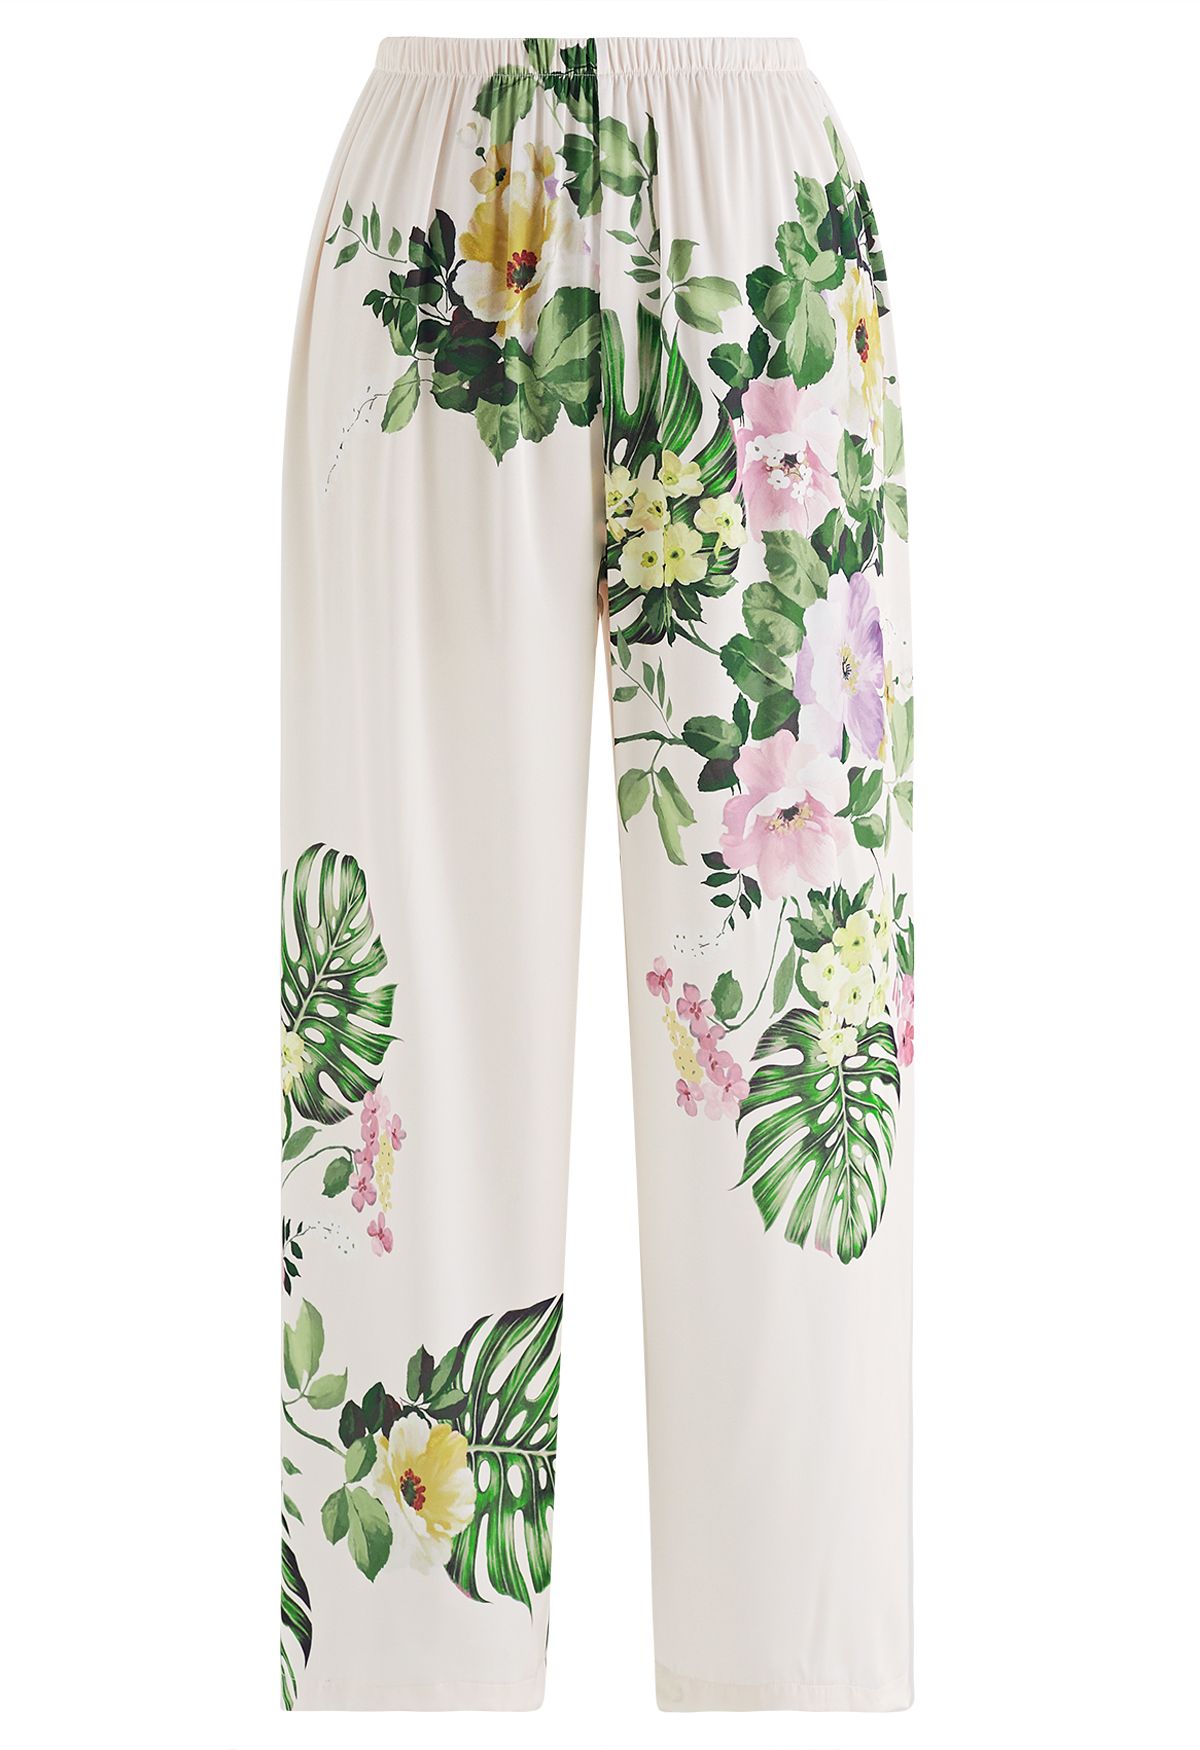 Various Flower Print Two-Piece Pajama Set in Ivory